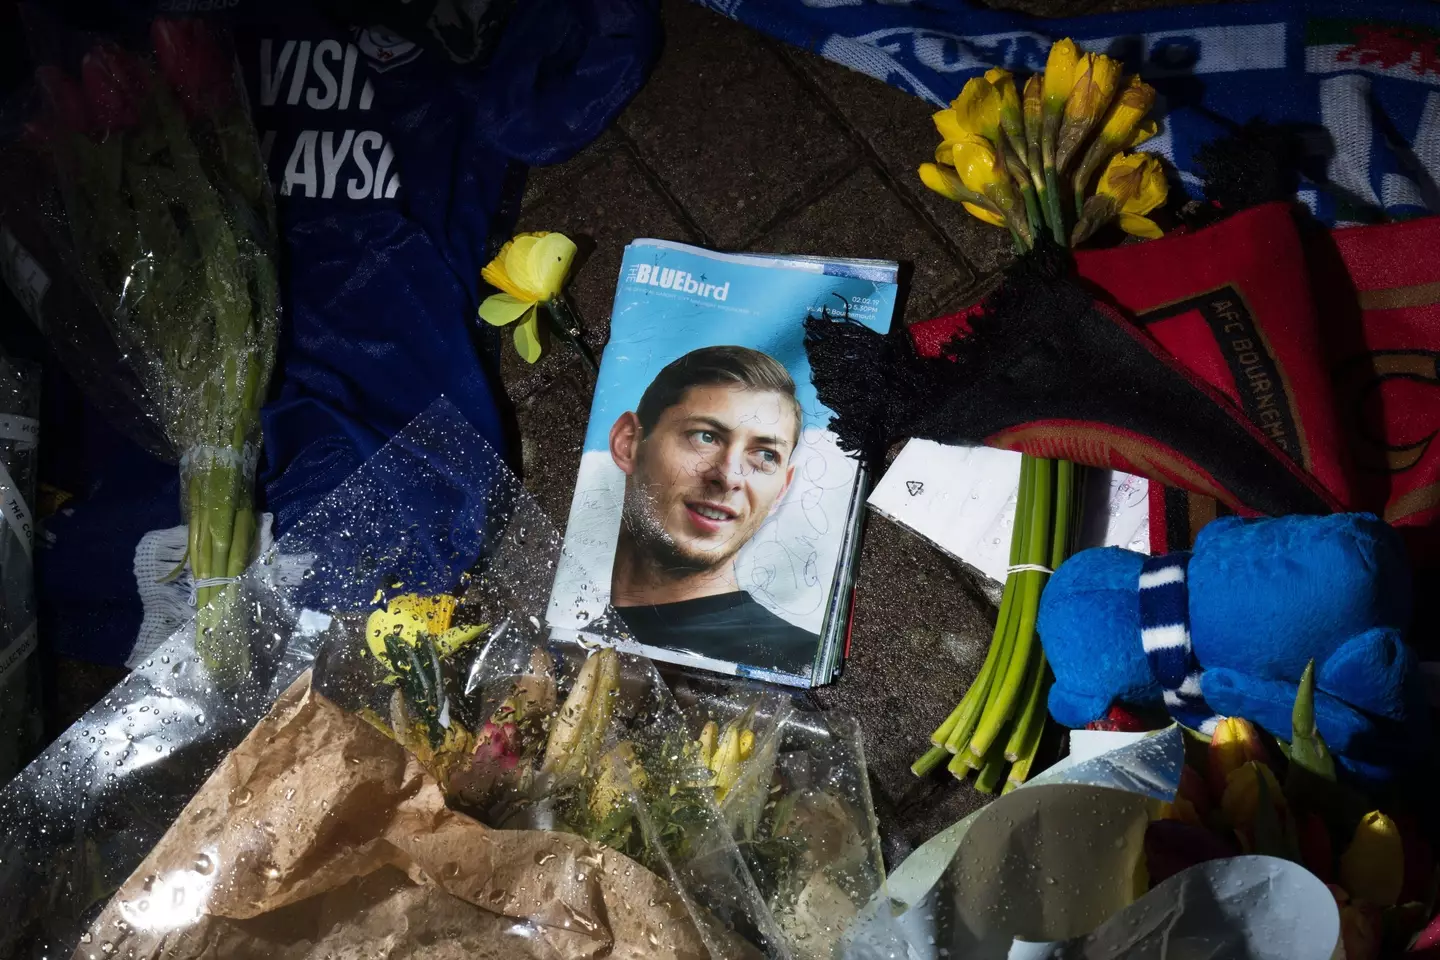 Sala died as a result of a plane crash, having been overcome by toxic levels of carbon monoxide during an unlicensed commercial flight, an inquest jury concluded. Image credit: Alamy